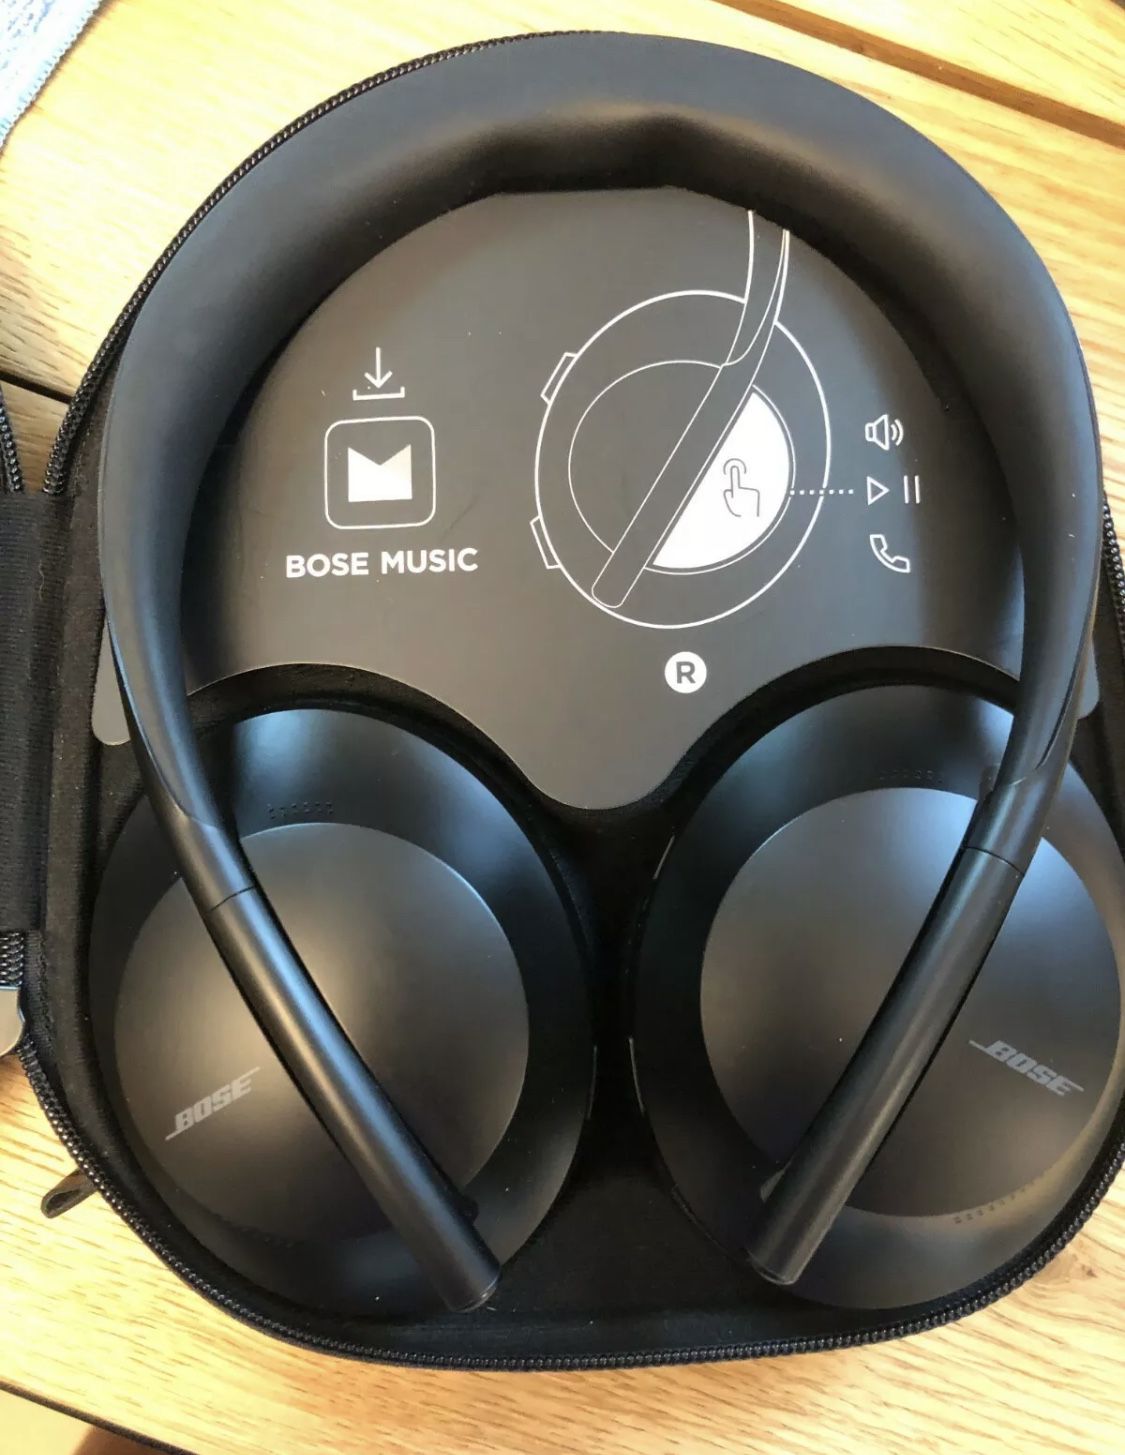 Bose 700 noise cancellations